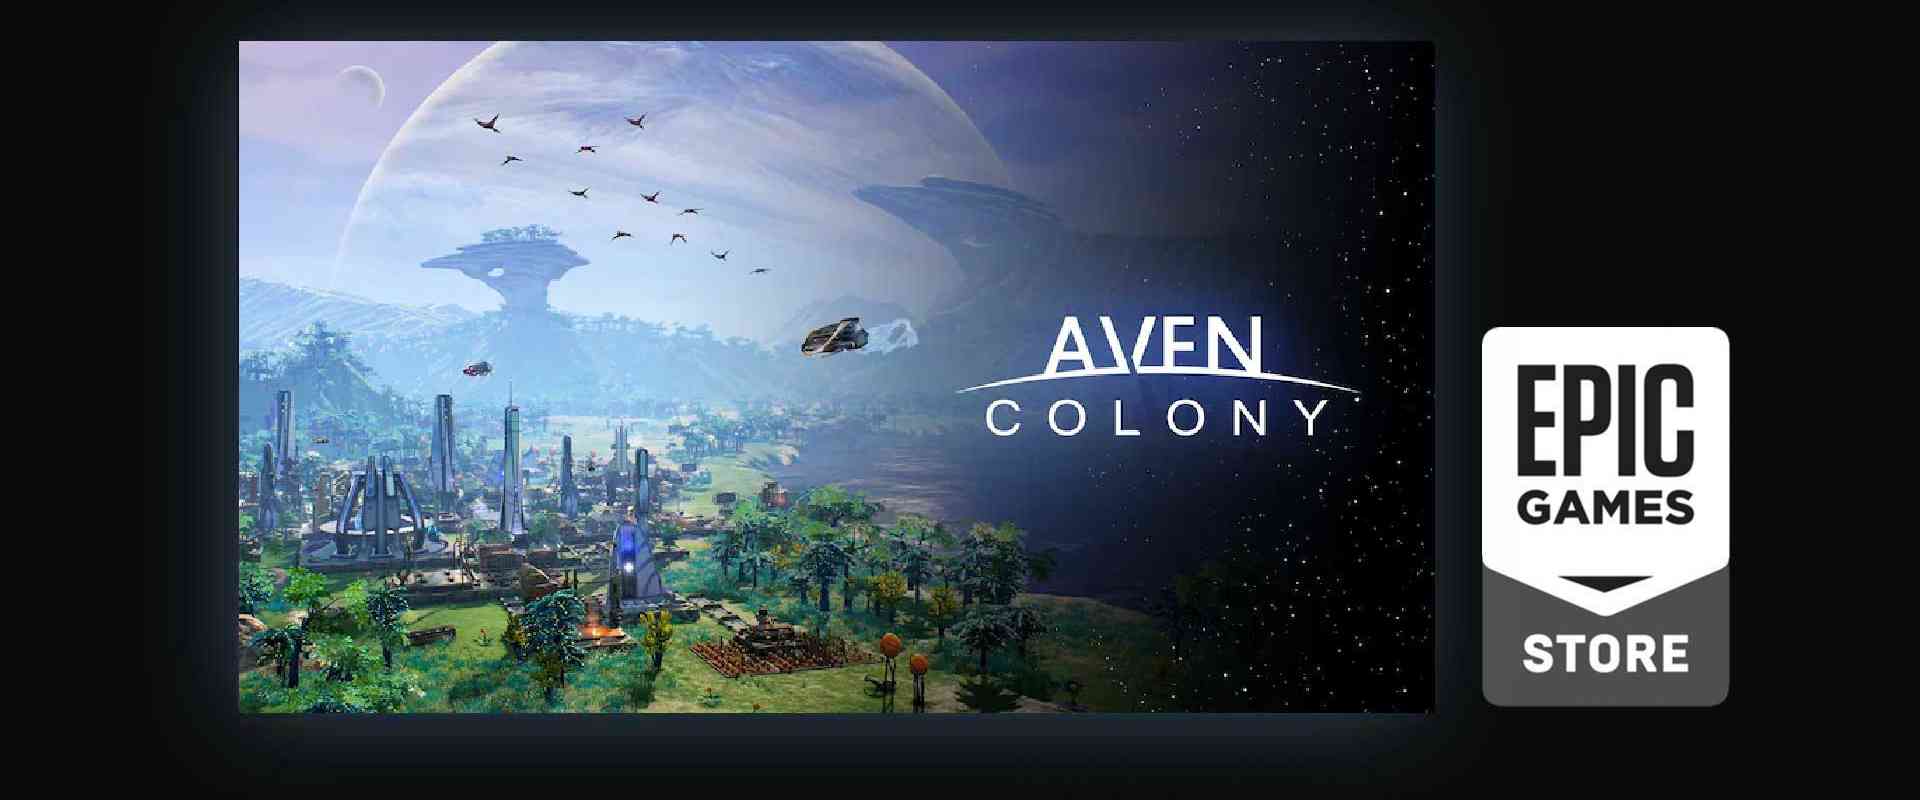 epic game free game 2021 aven colony